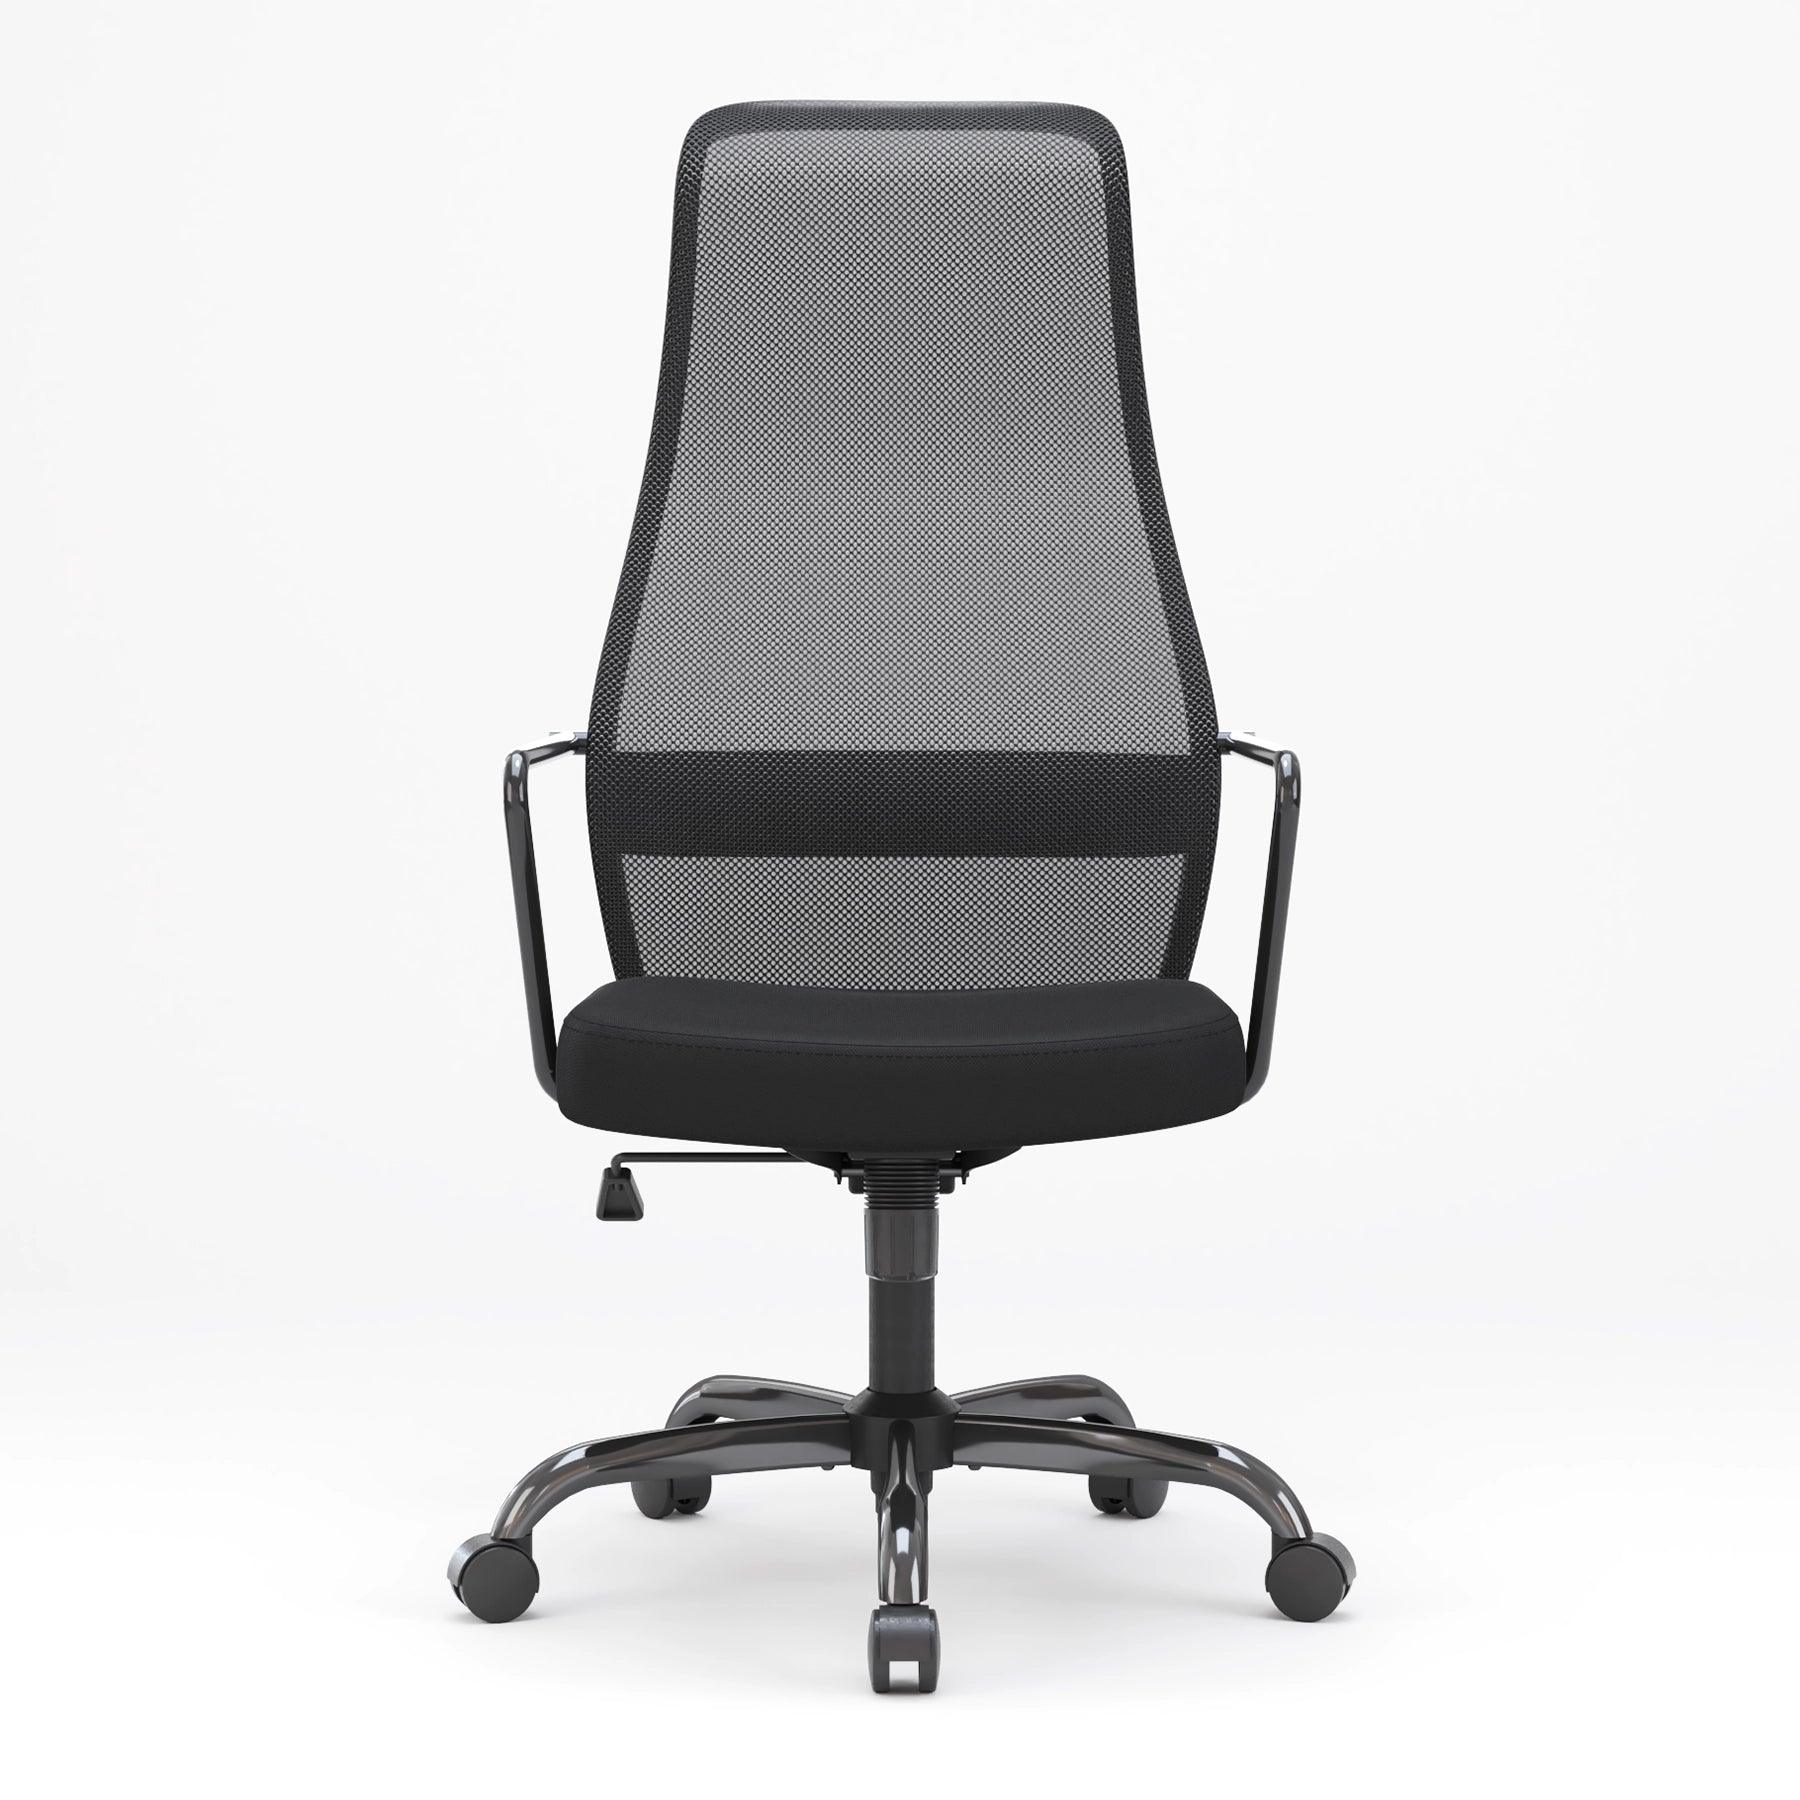 Sihoo M101C High-Back Ergonomic Office Chair - Comfort and Style